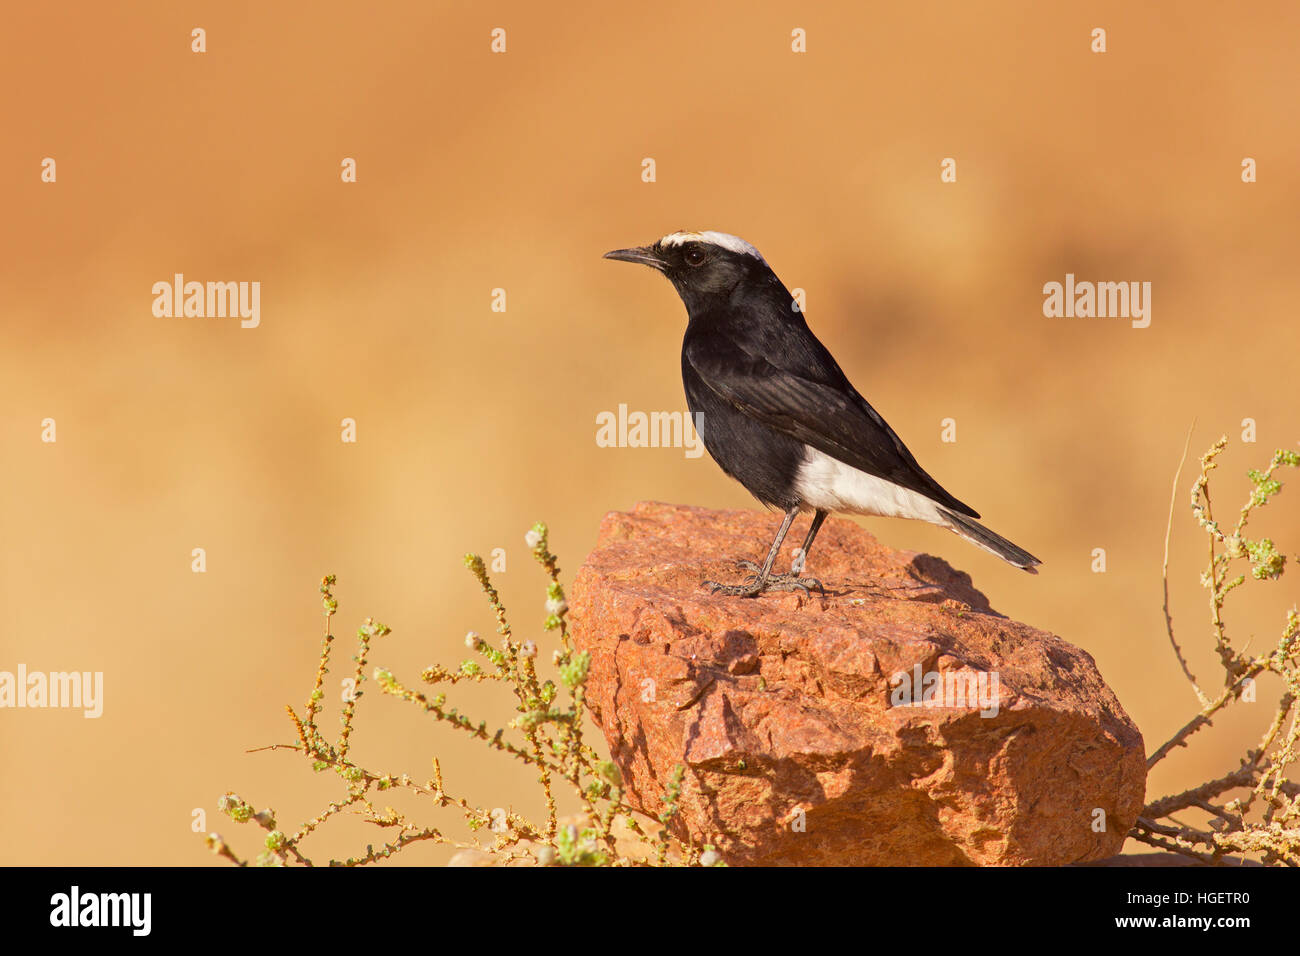 white-crowned wheatear, or white-crowned black wheatear (Oenanthe leucopyga) is a small passerine bird in the Old World flycatcher, Muscicapidae famil Stock Photo